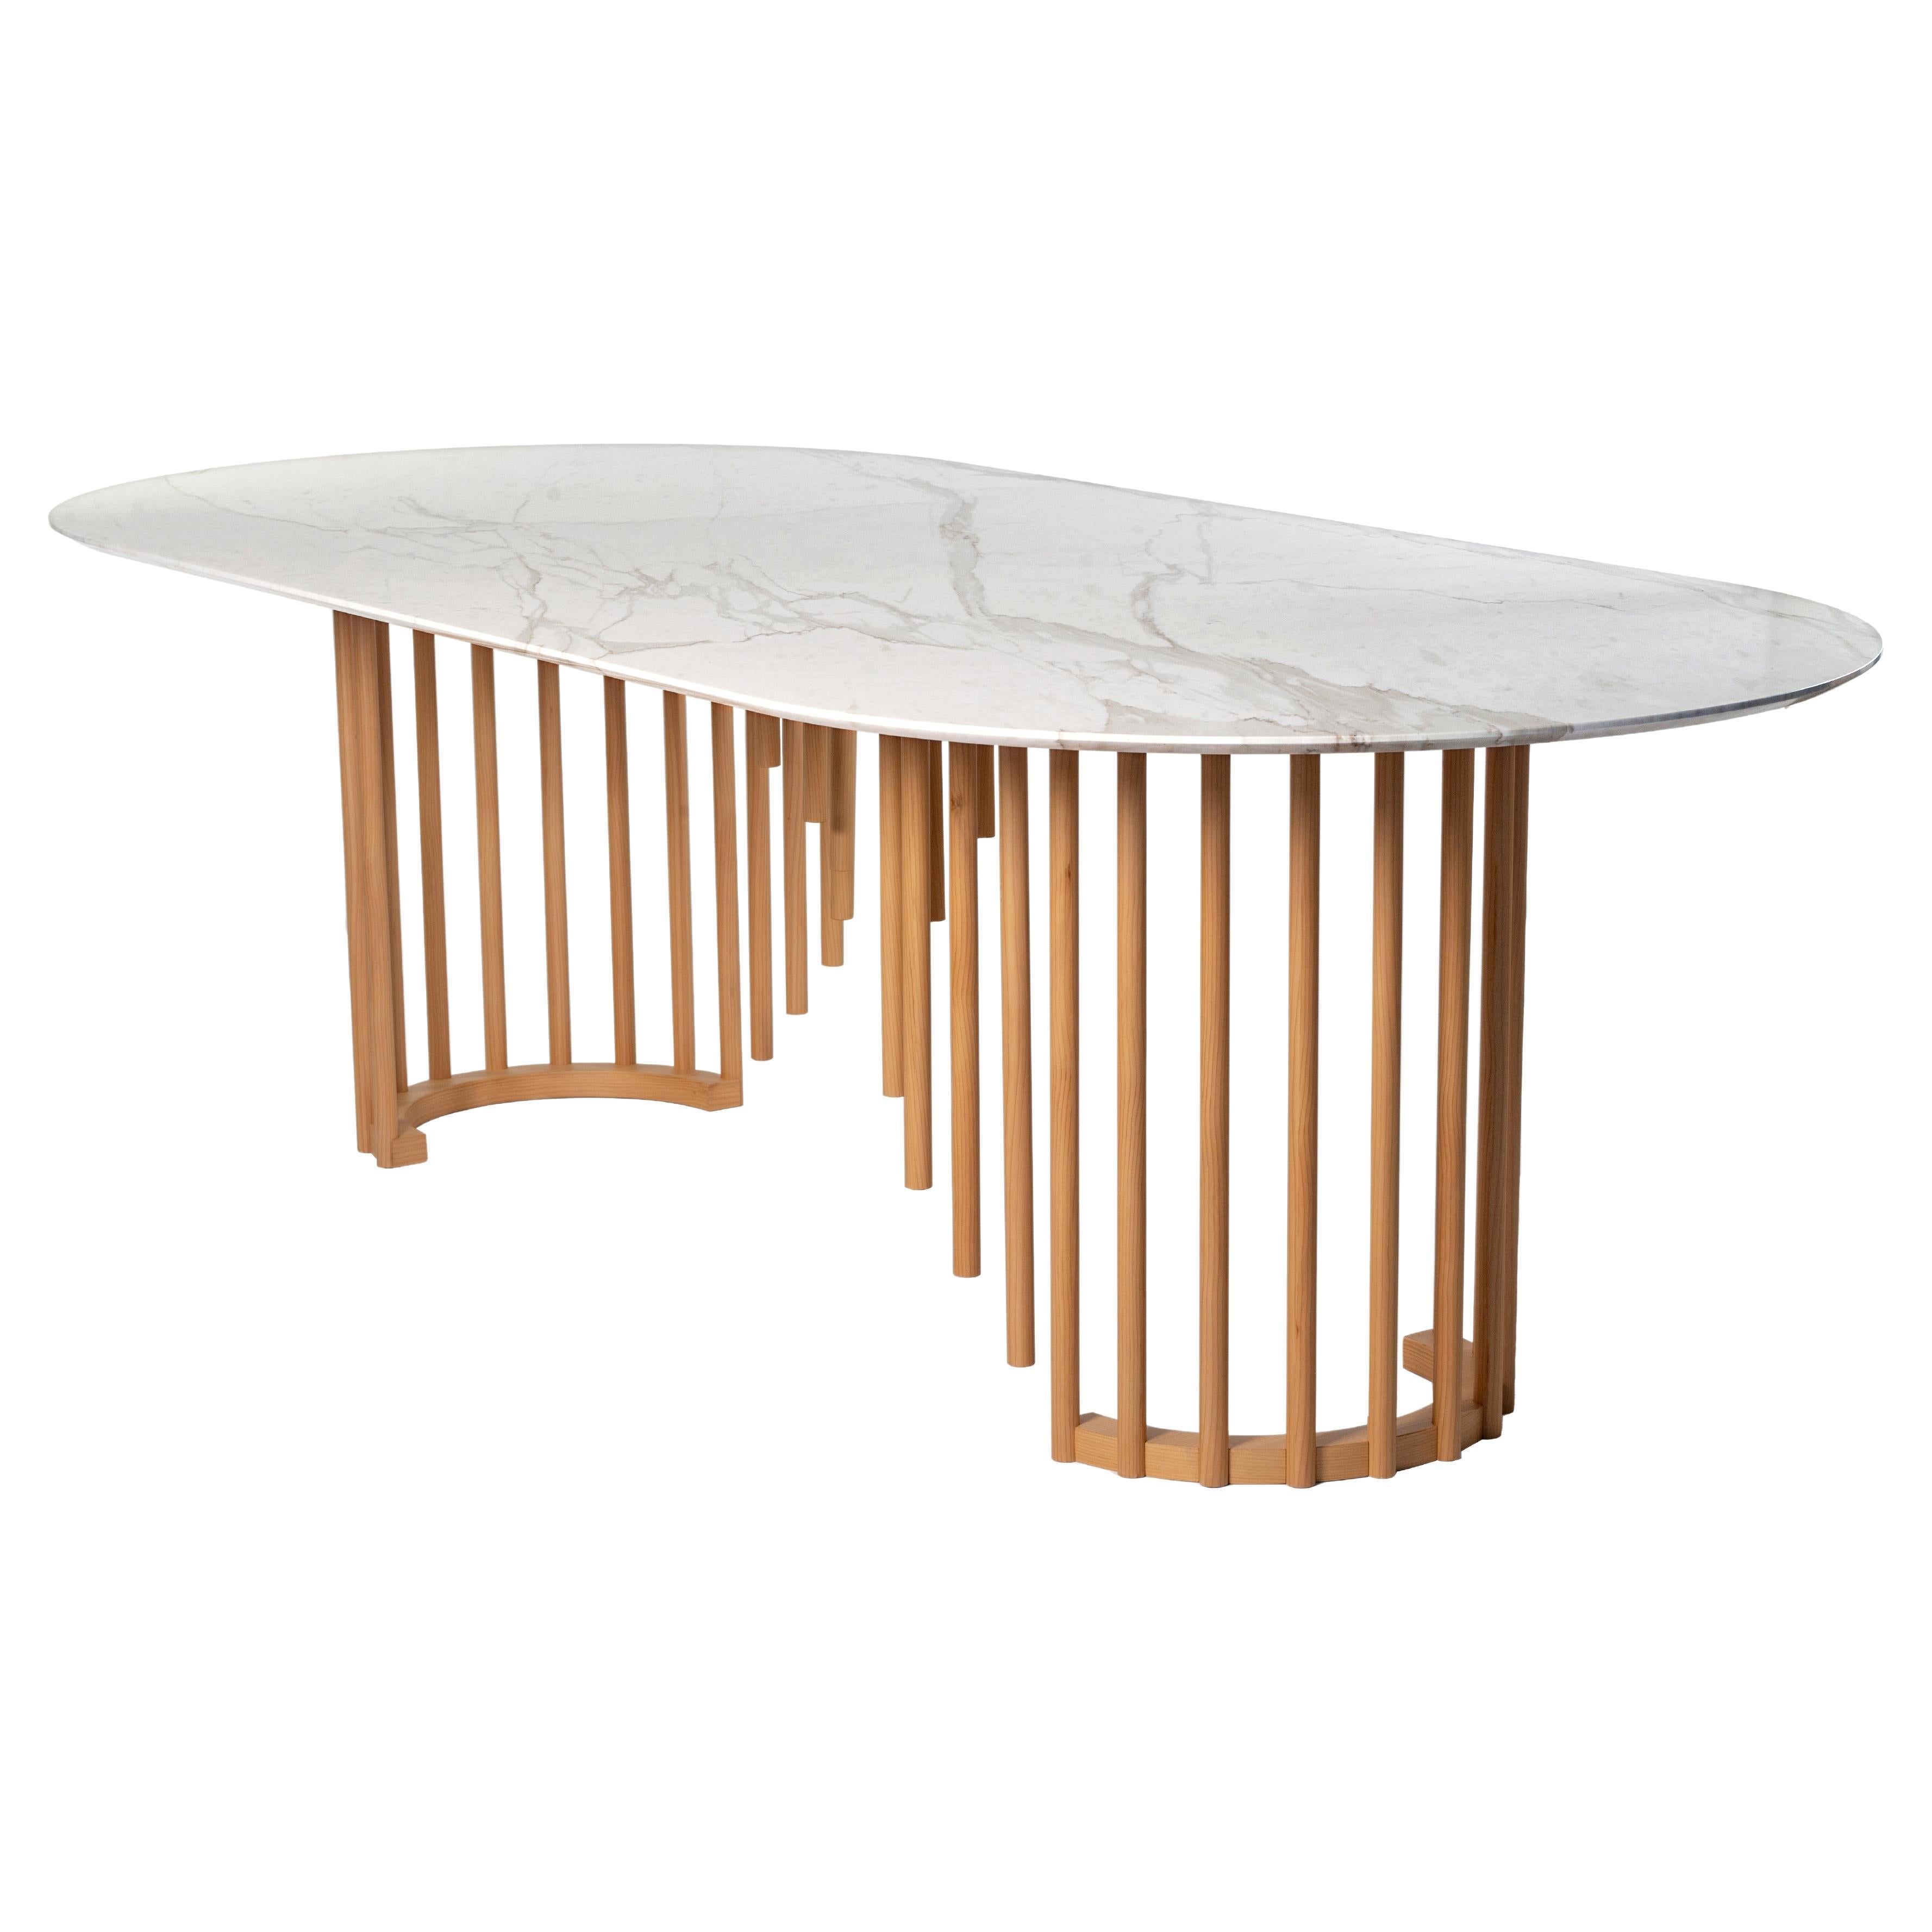 21st Century Giunchi Table in white Marble Calacatta and Cedar, Made in Italy For Sale